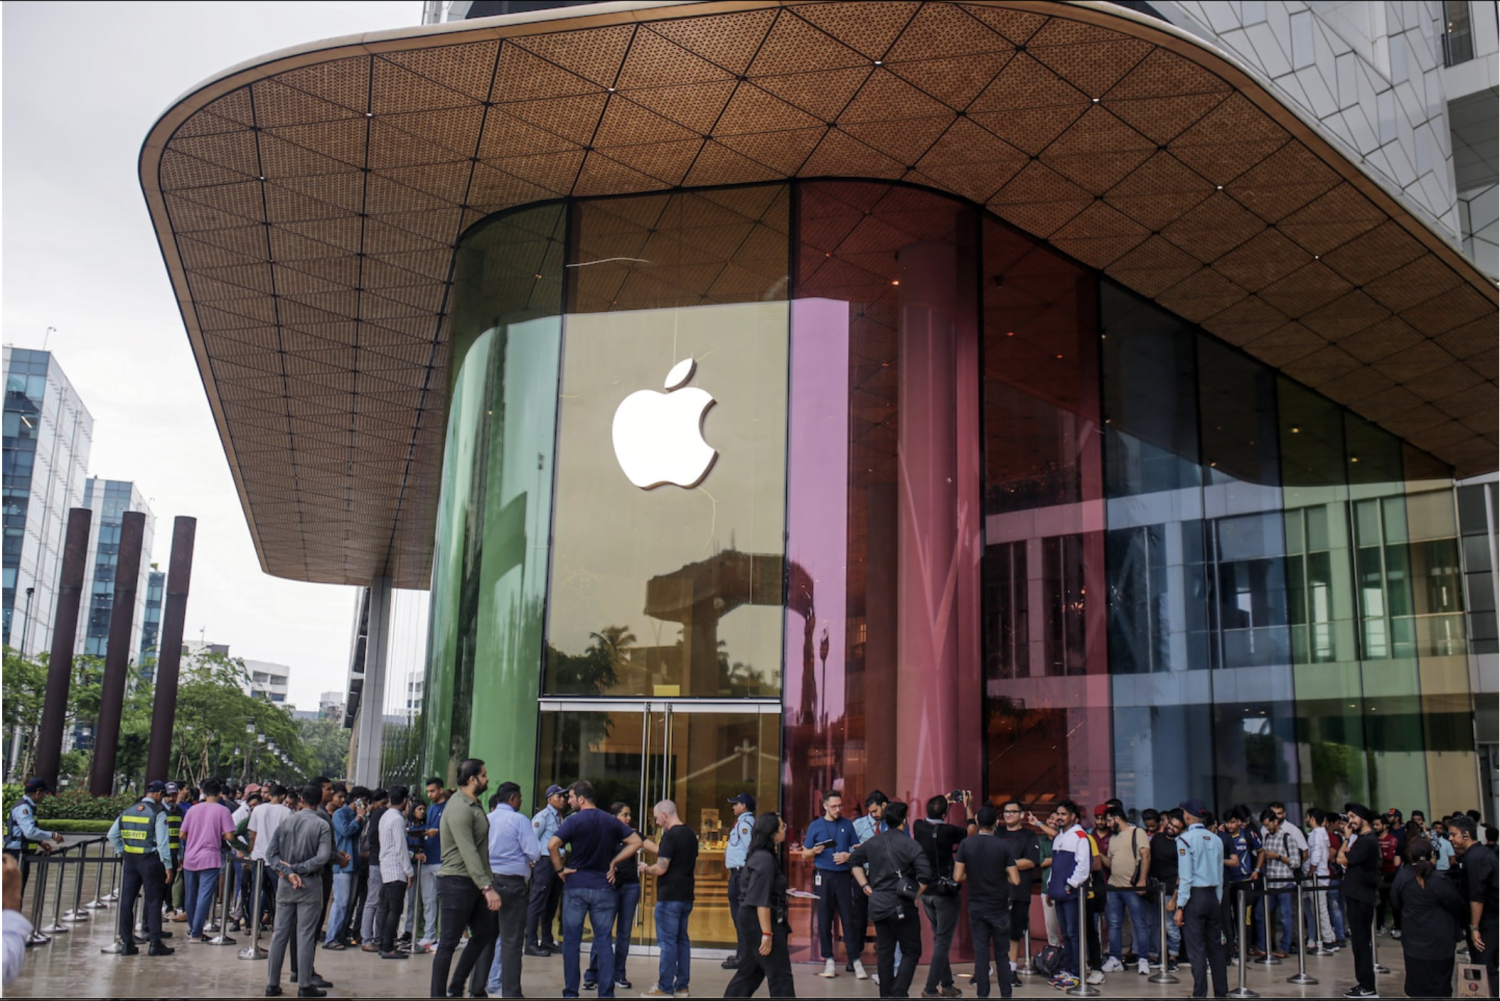 Customers outside a Mumbai Apple store in September. In private, the Indian government tried to pressure Apple to help soften the impact of the company’s warnings about potential government hacking. (Dhiraj Singh/Bloomberg News/Getty Images)